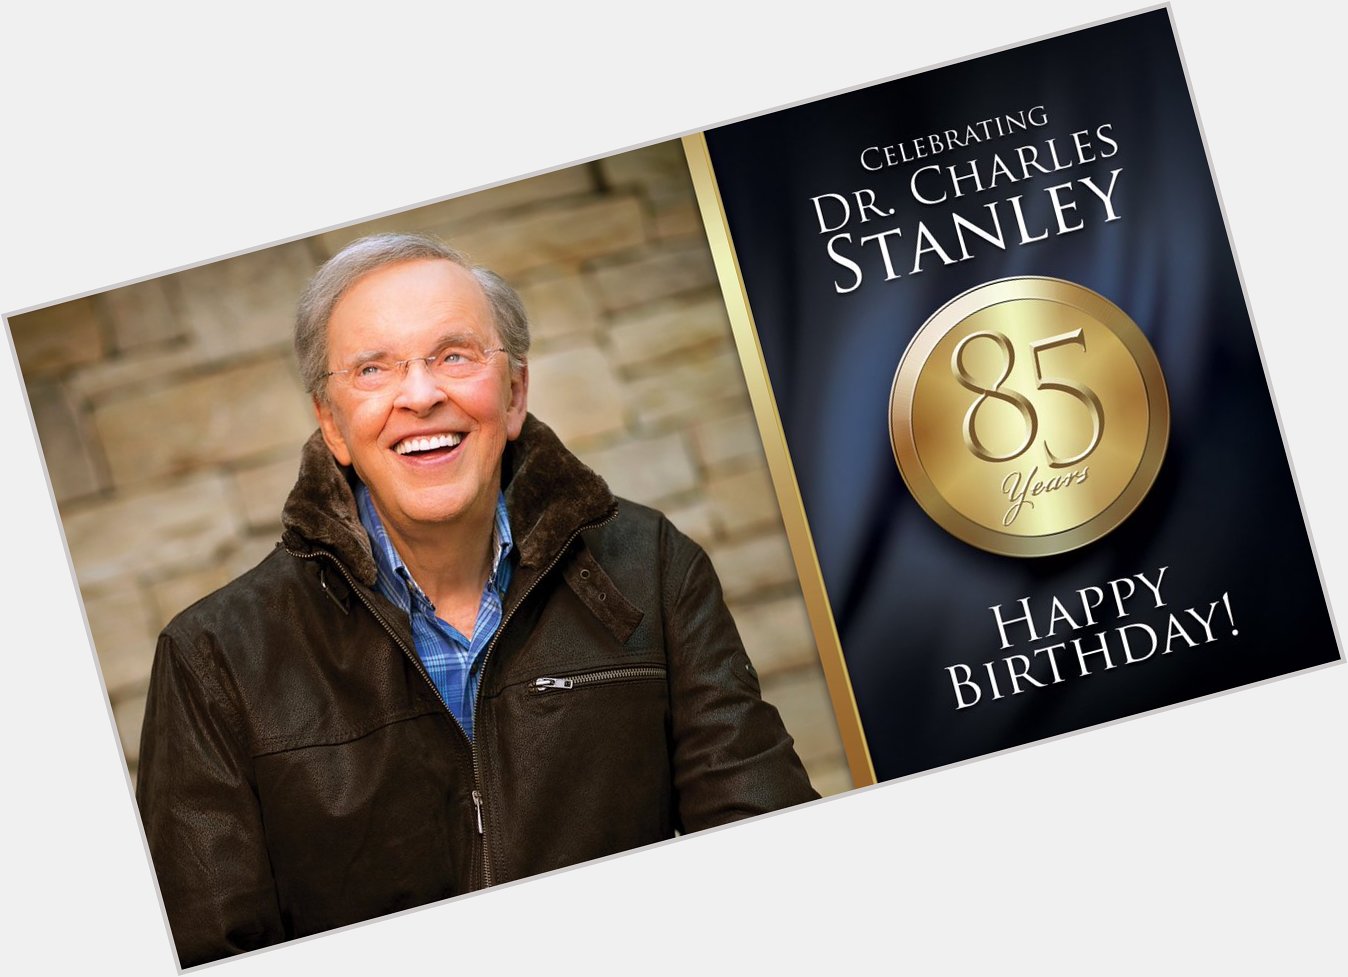 Celebrating 85 years of life! Please join us in wishing our pastor, Dr. Charles Stanley, a Happy Birthday!! 